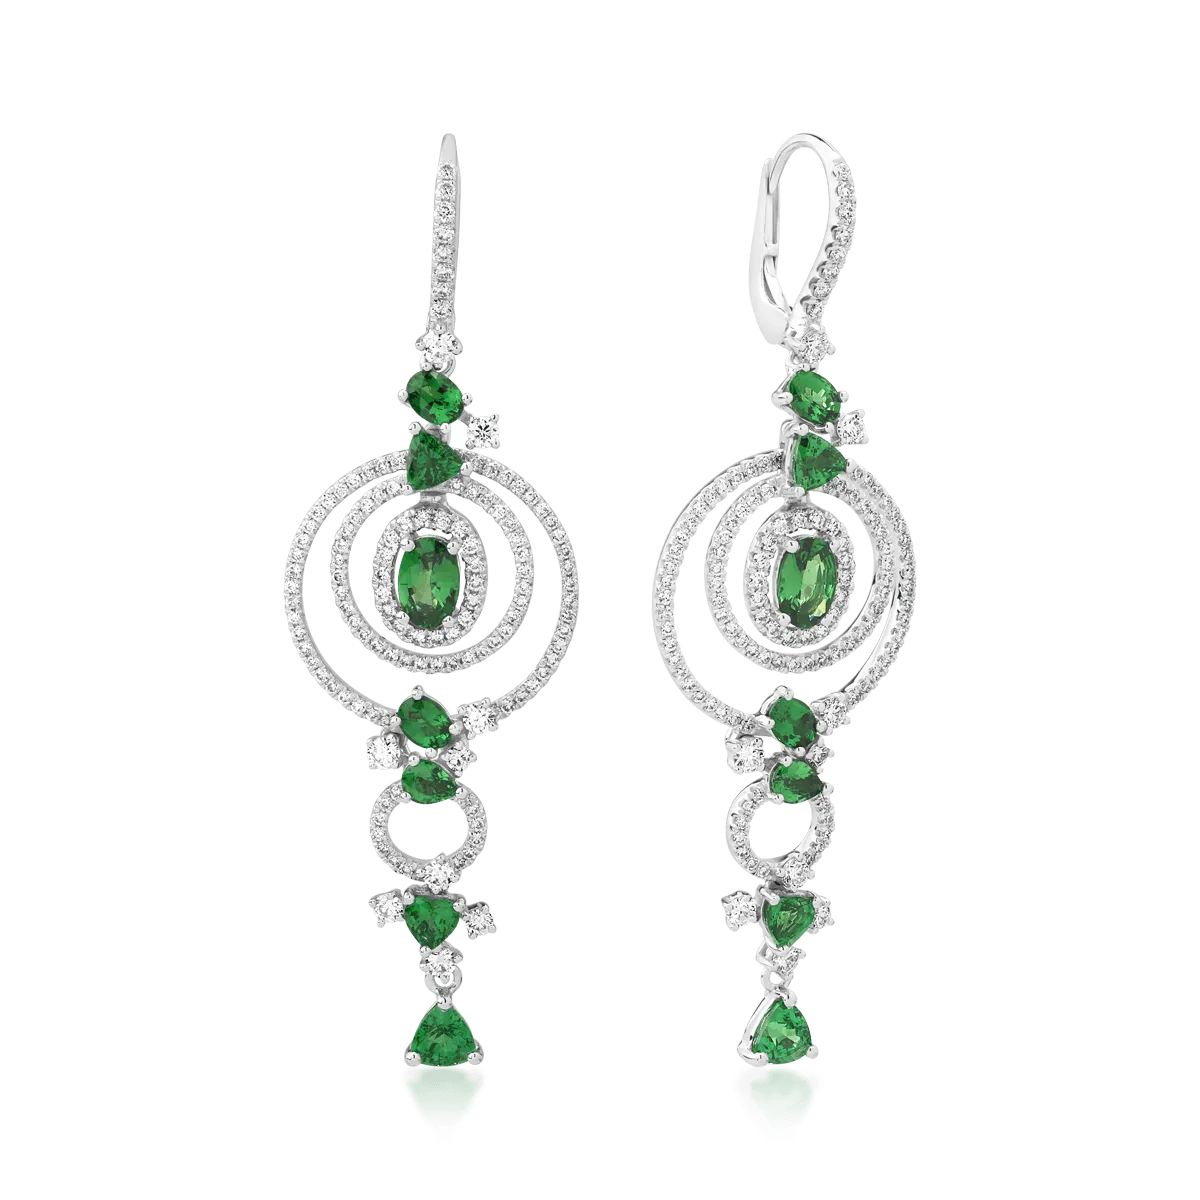 18K white gold earrings with 3.29ct green garnets and 1.65ct diamonds